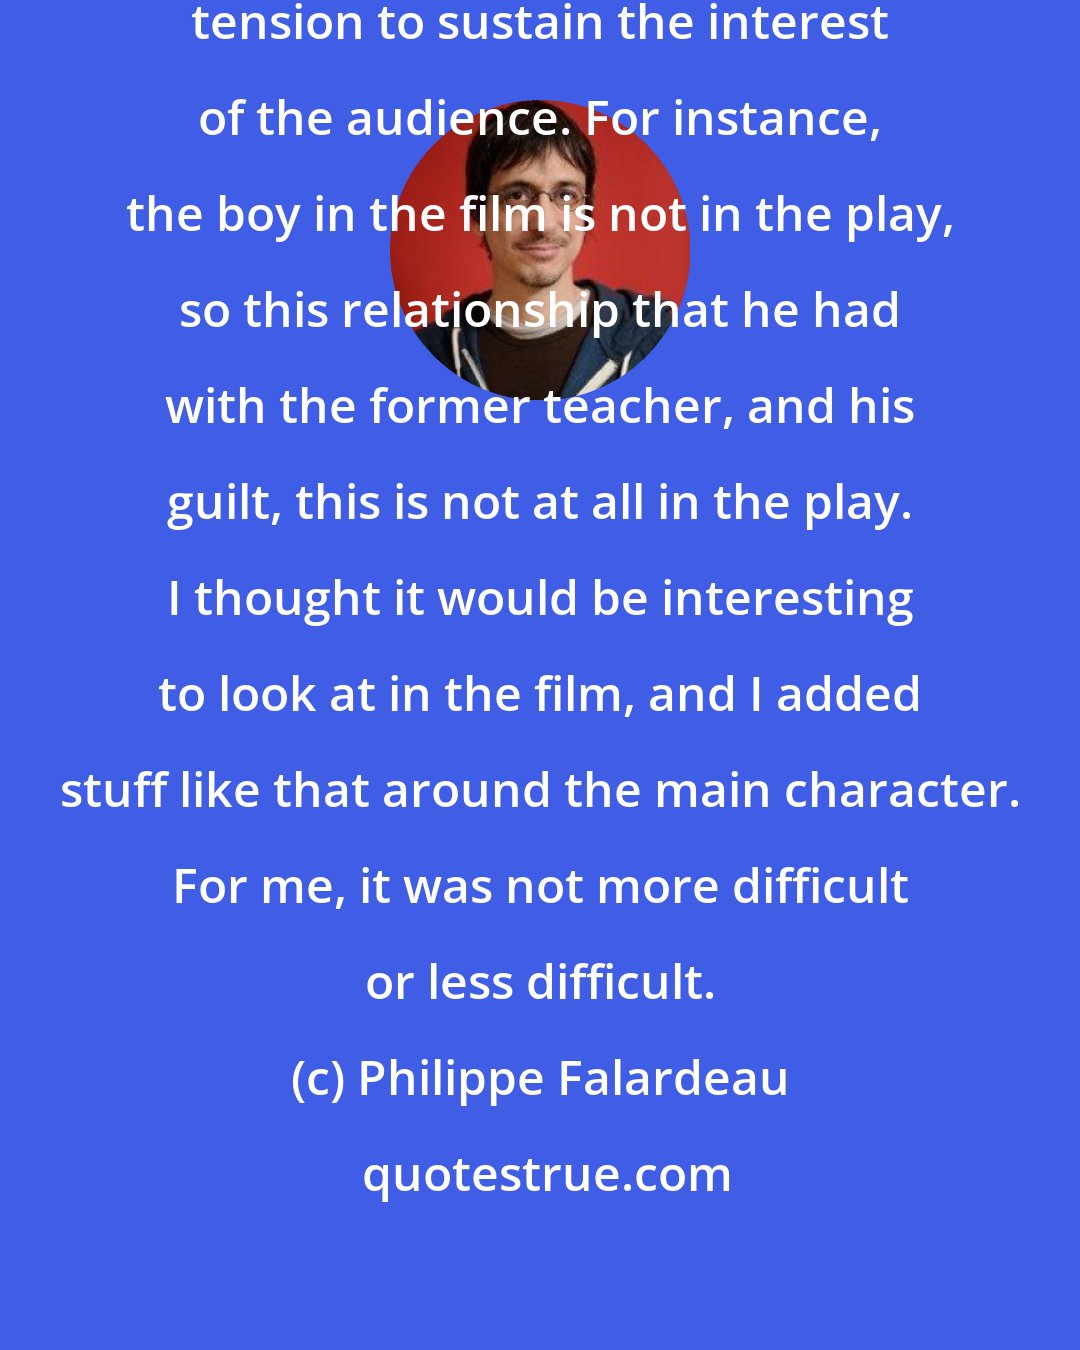 Philippe Falardeau: I needed to create some dramatic tension to sustain the interest of the audience. For instance, the boy in the film is not in the play, so this relationship that he had with the former teacher, and his guilt, this is not at all in the play. I thought it would be interesting to look at in the film, and I added stuff like that around the main character. For me, it was not more difficult or less difficult.